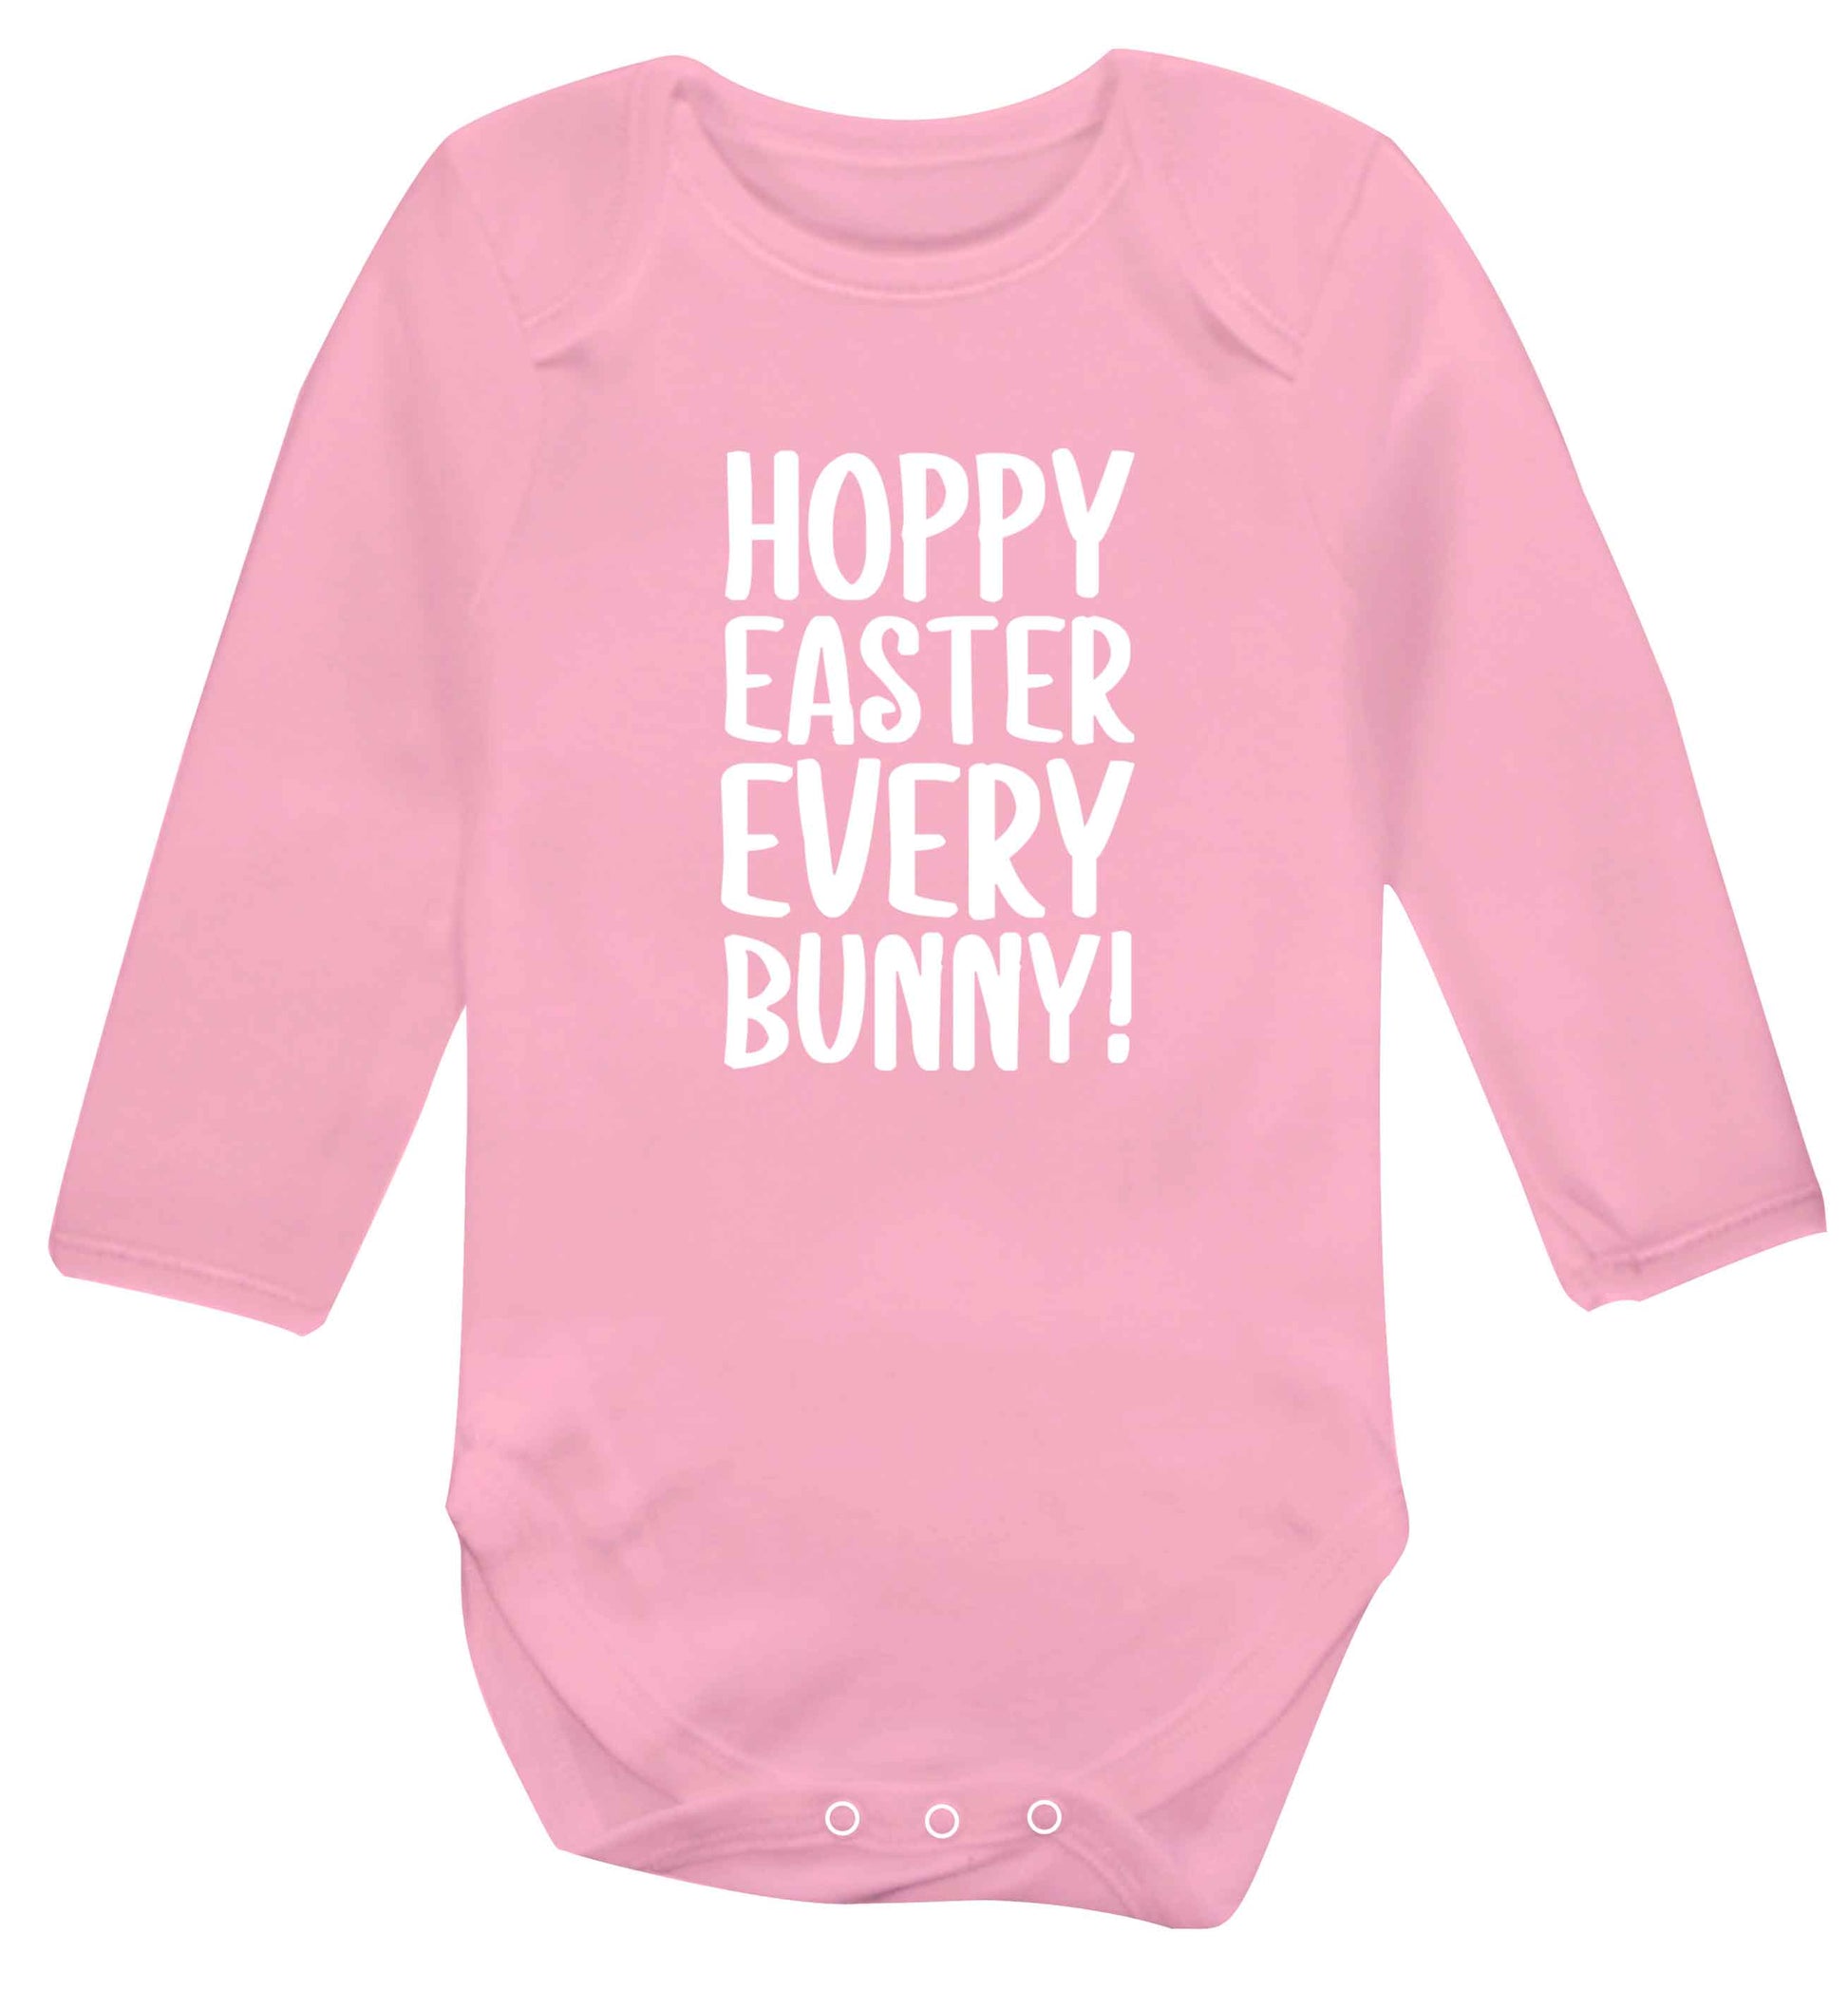 Hoppy Easter every bunny! baby vest long sleeved pale pink 6-12 months